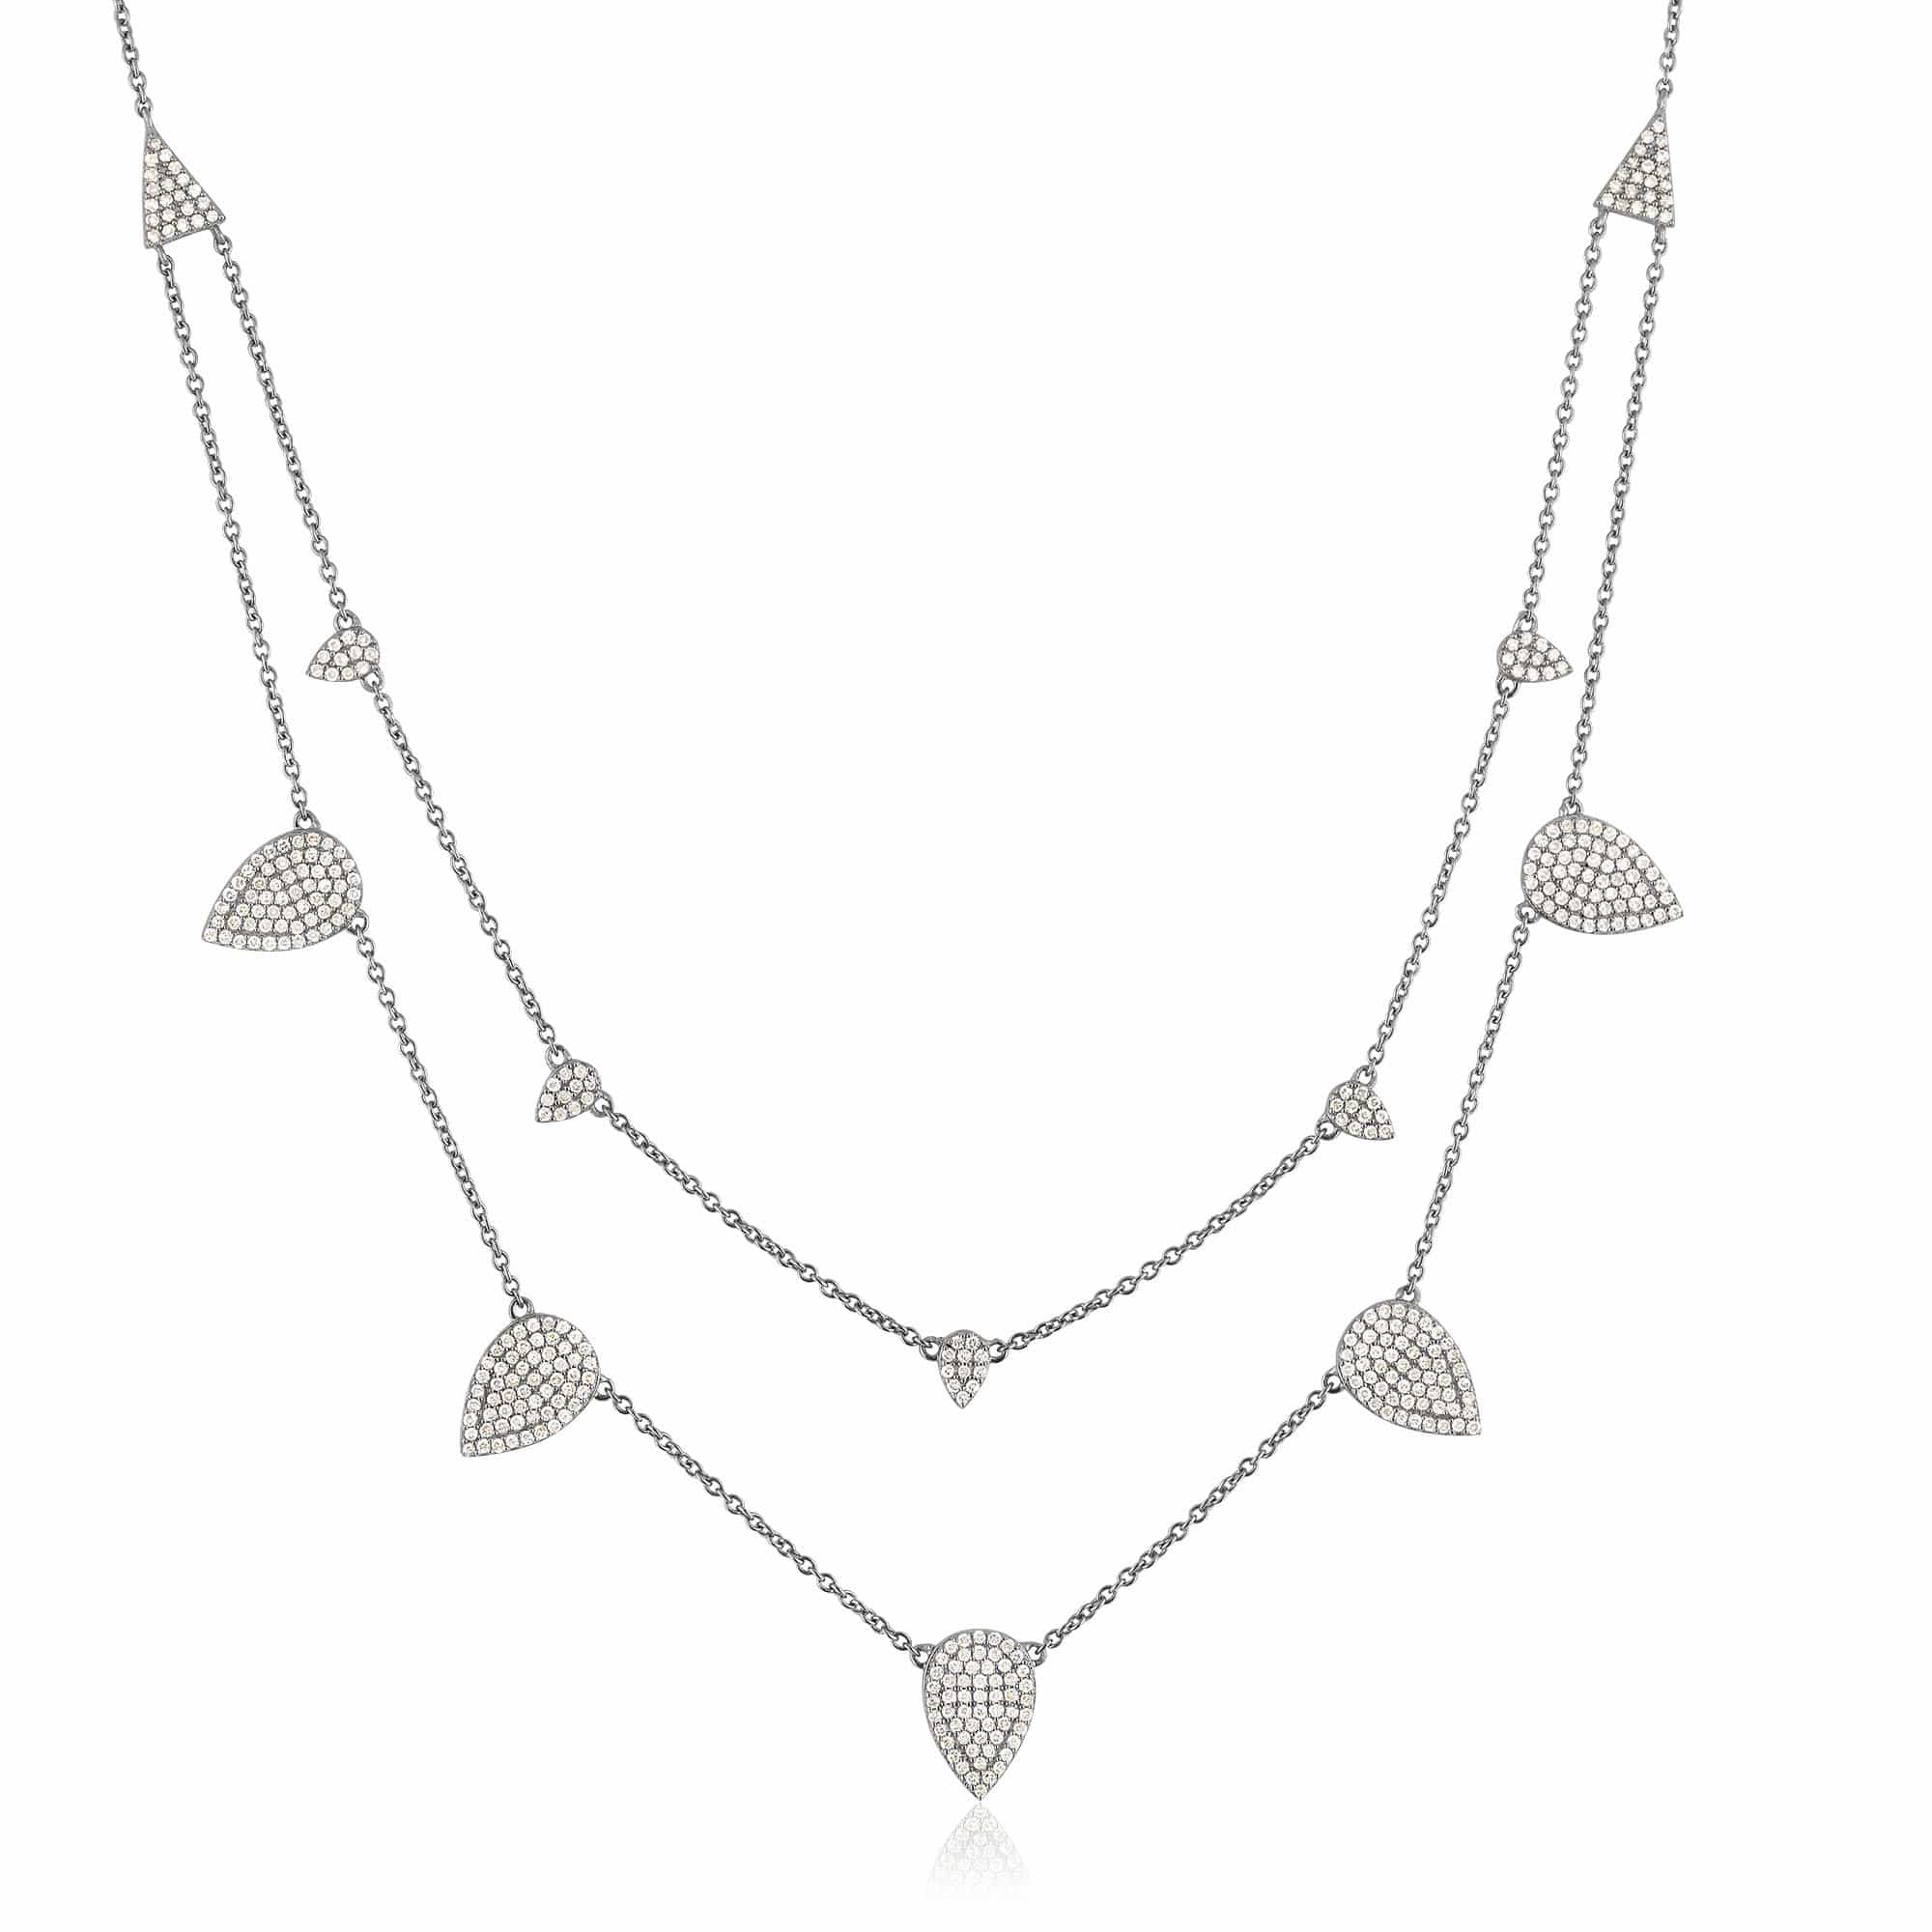 ela rae double pear necklace diamond sterling silver